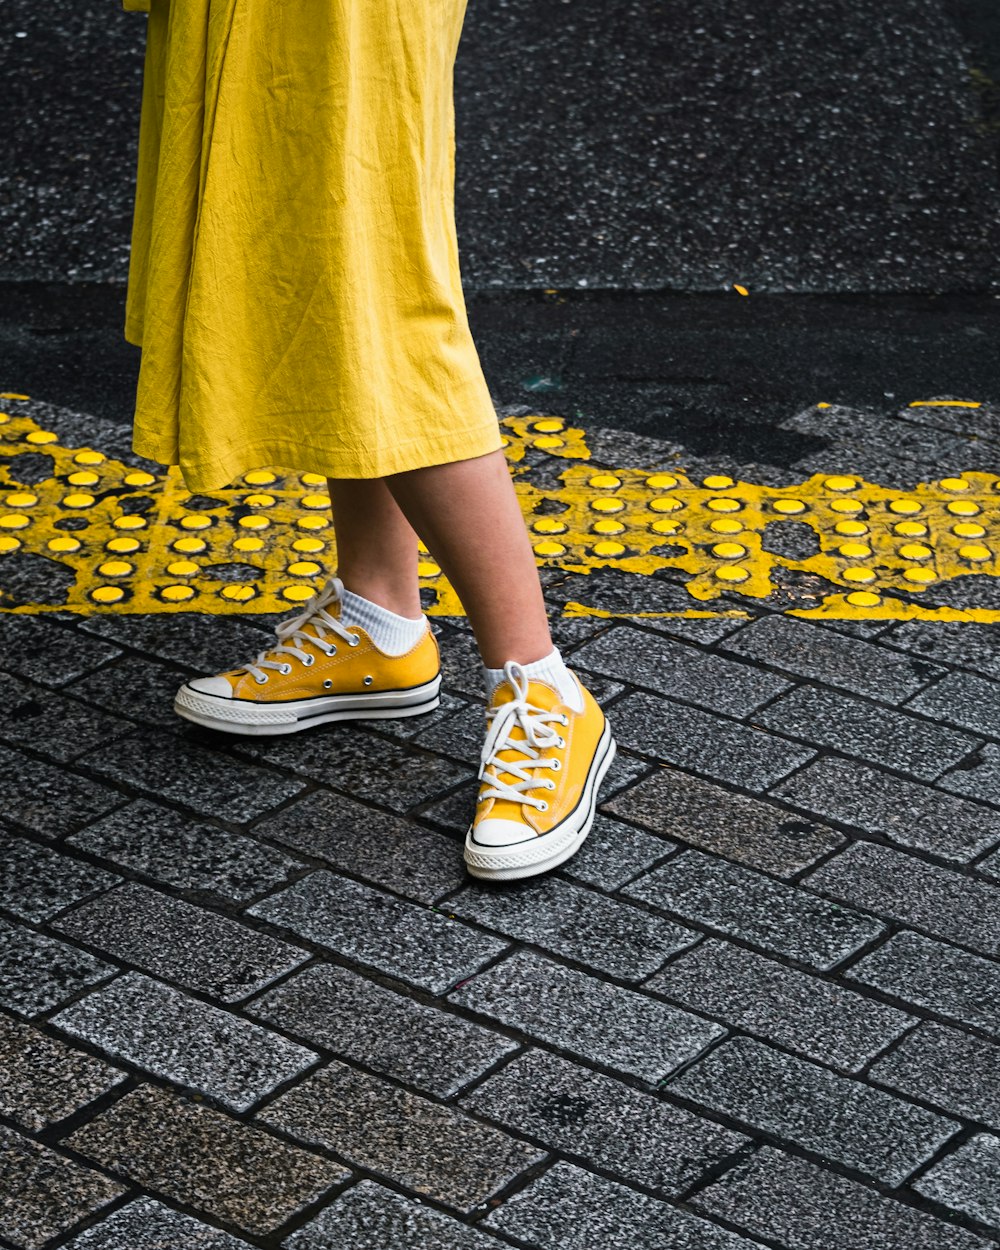 person wearing yellow maxi dress and yellow Converse low-top sneaker